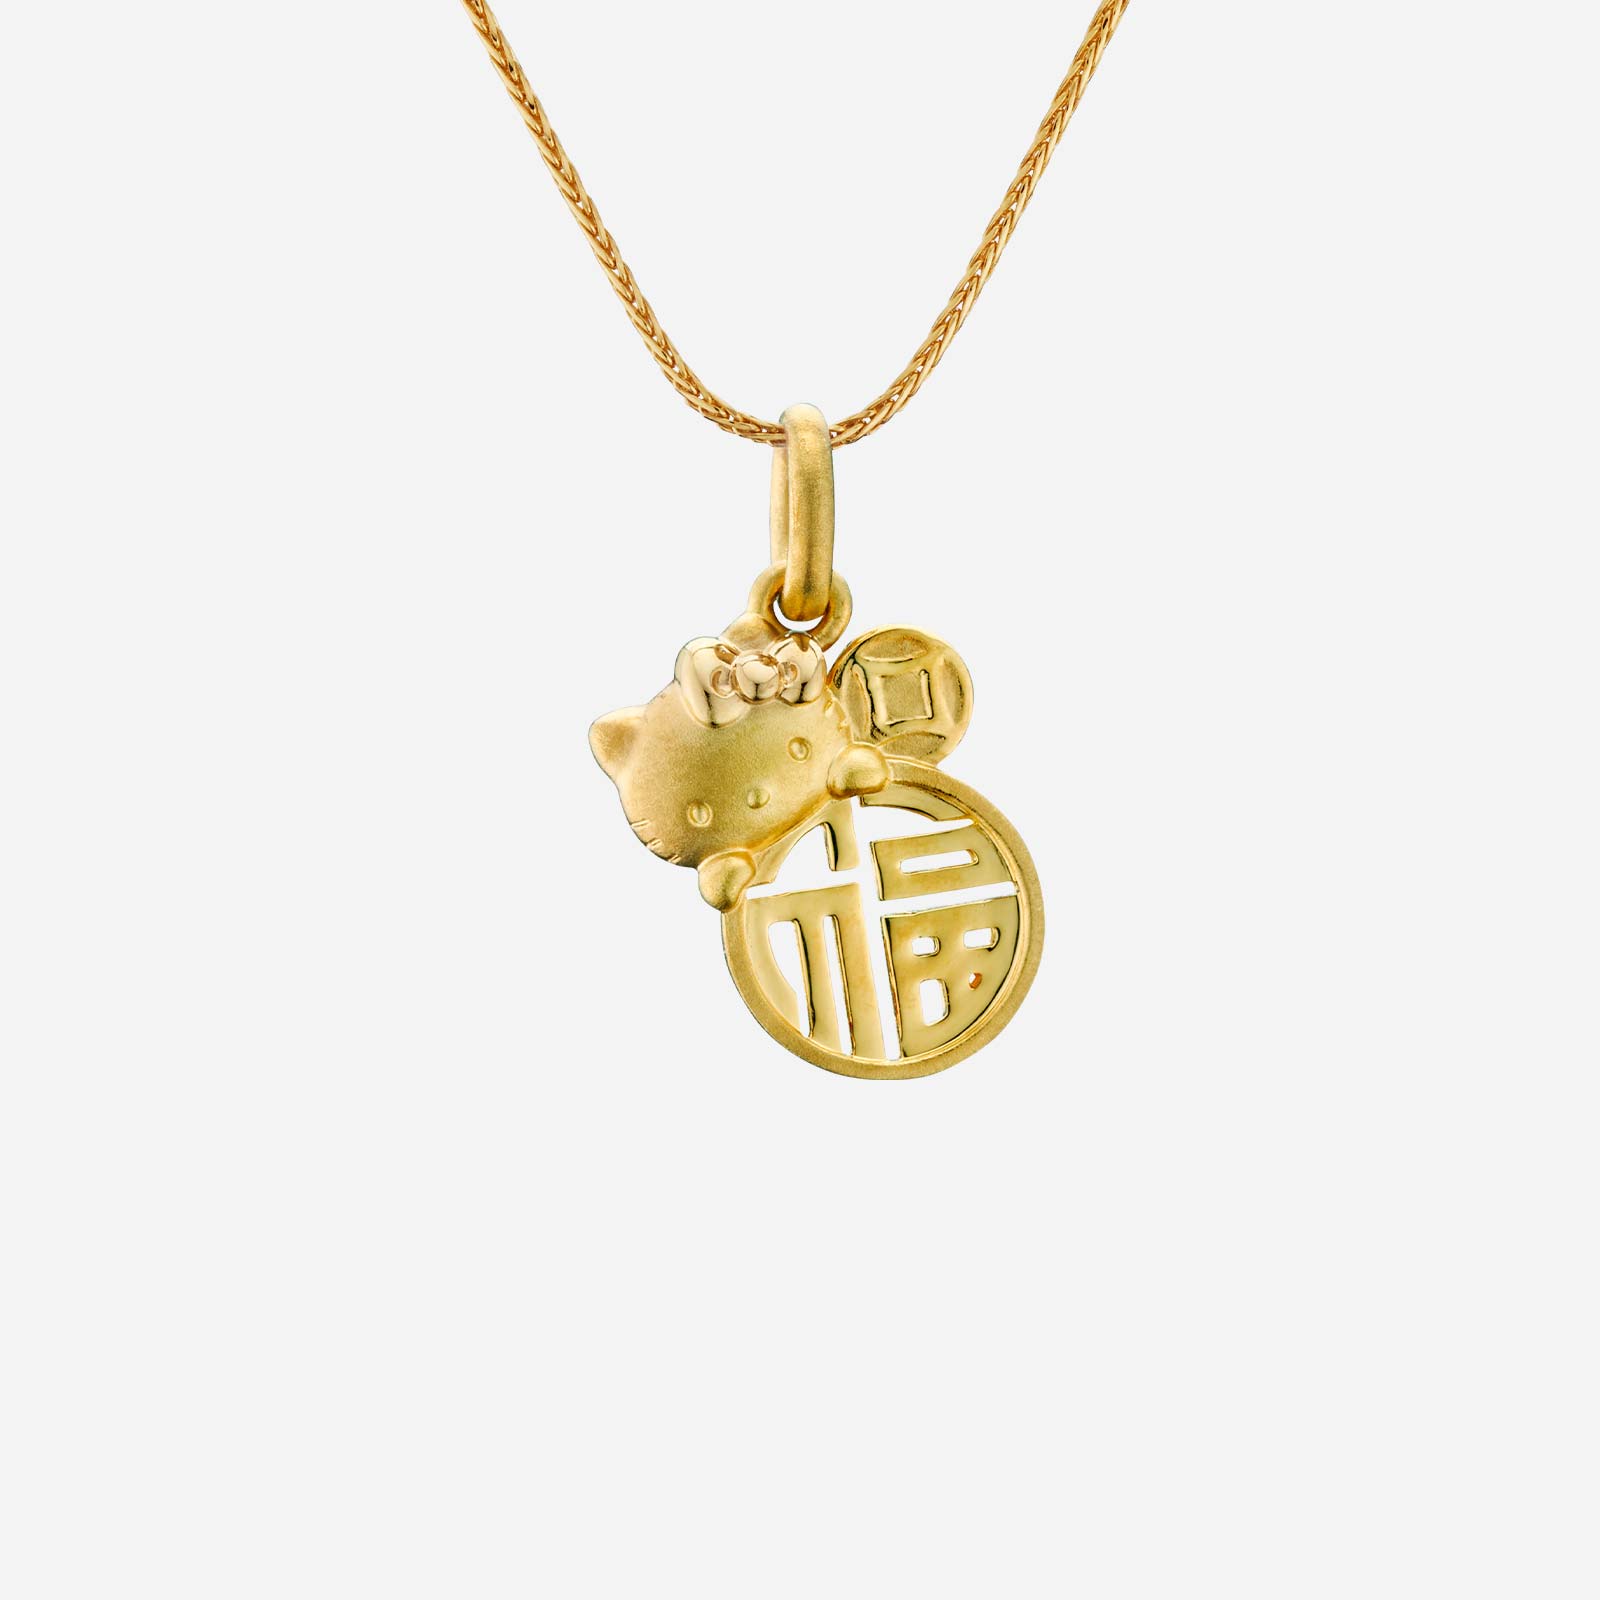 Poh Heng Hello Kitty Good Fortune Pendant in 22K Yellow Gold	